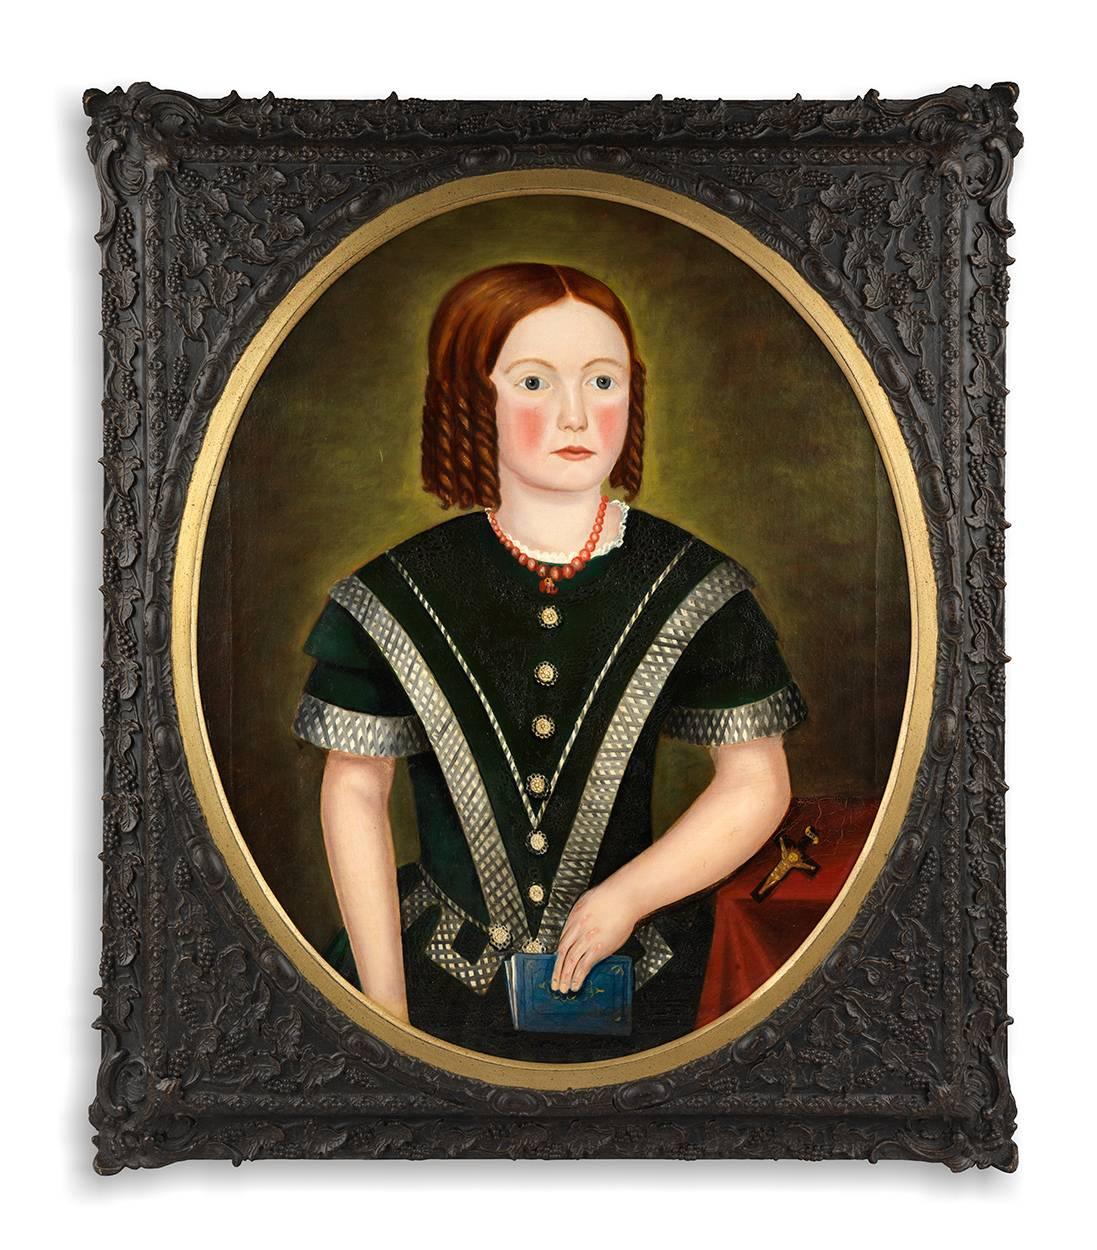 Oils on Canvas, Retaining the Original Decorative,
Painted Wood and Gesso Frames
C.1840
Graphically powerful and important large scale naive family folk art portraits, depicting a mother, her son and daughter. 
These three companion works are